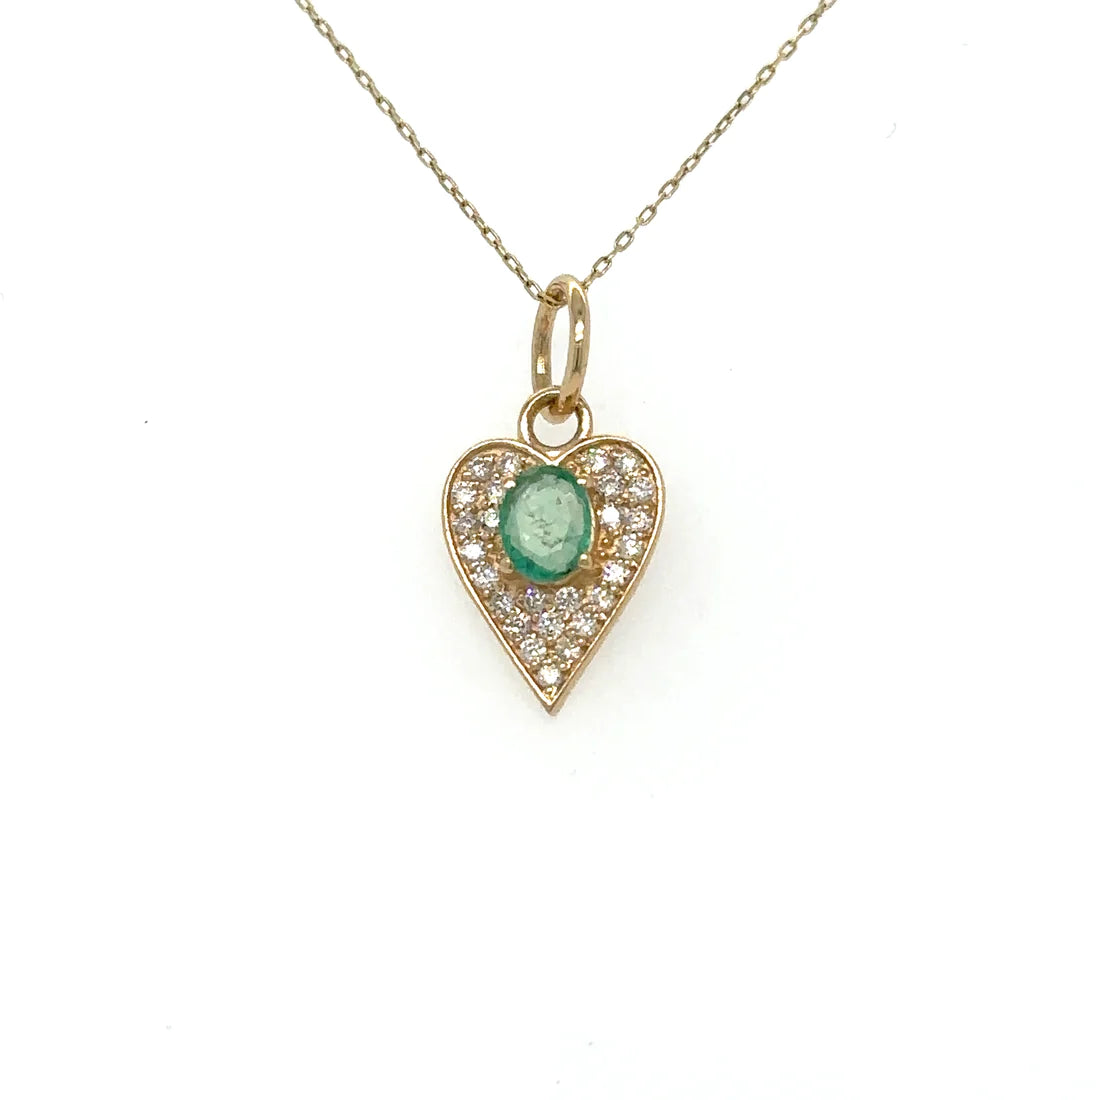 Heart Pendant With Emerald and Diamonds